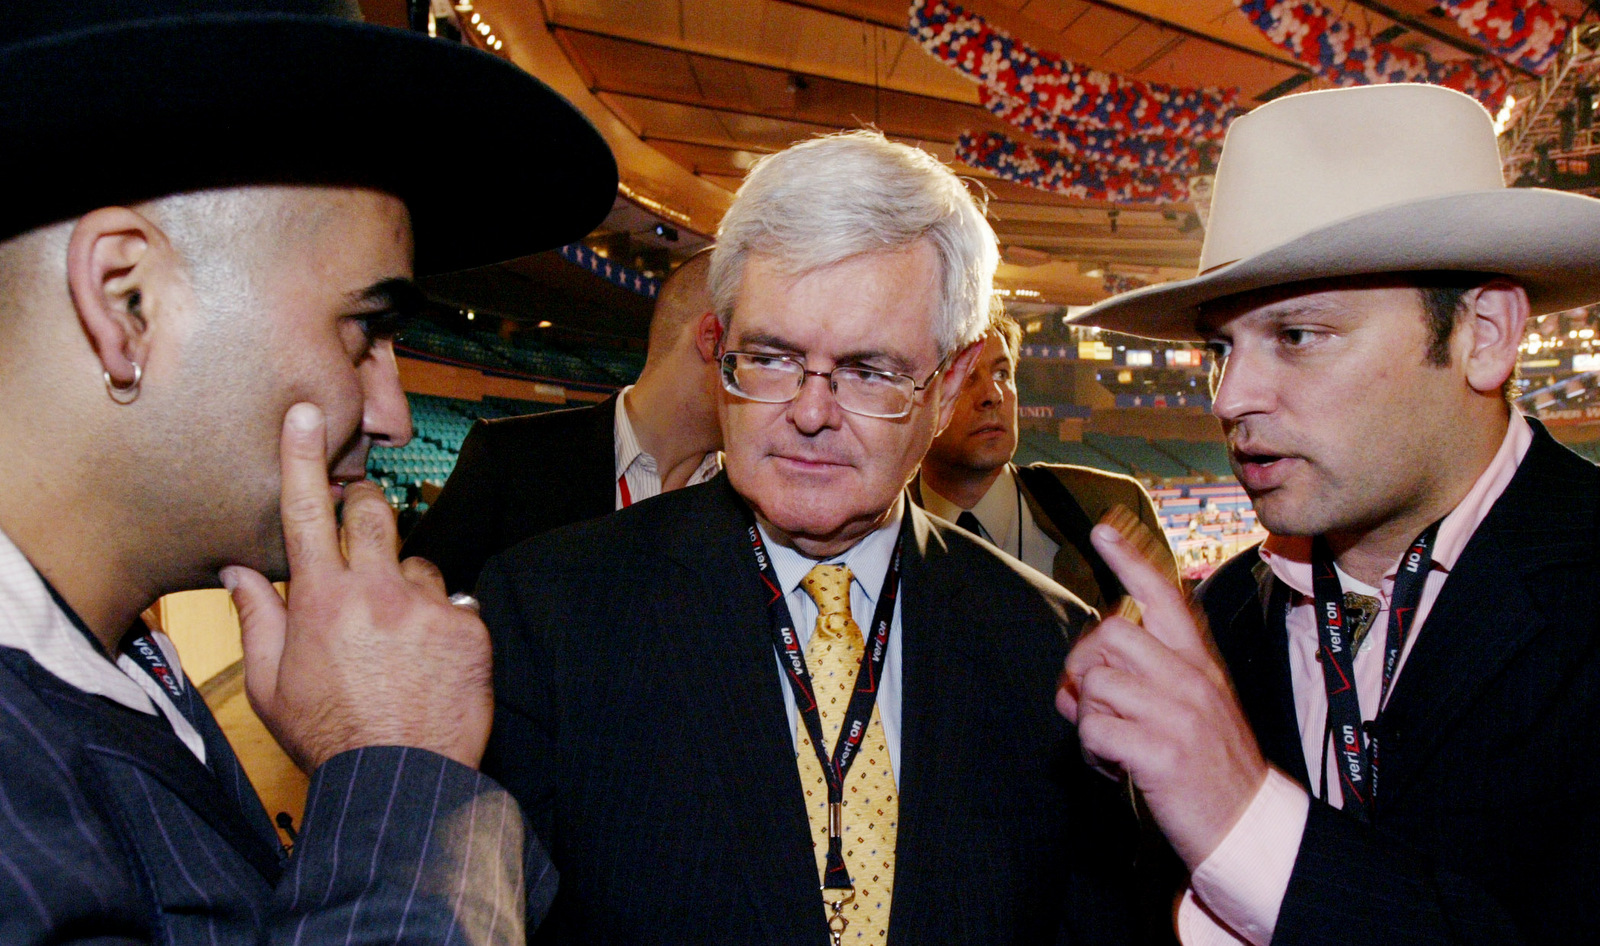 Newt Gingrich, center, former Speaker of the U. S. House of Representatives, is interviewed by Dutch television journalists Gideon Levy, left, and Bahram Sadeghi at the Republican National Convention in Madison Square Garden, Sept. 1, 2004 in New York. (AP/Gregory Bull)